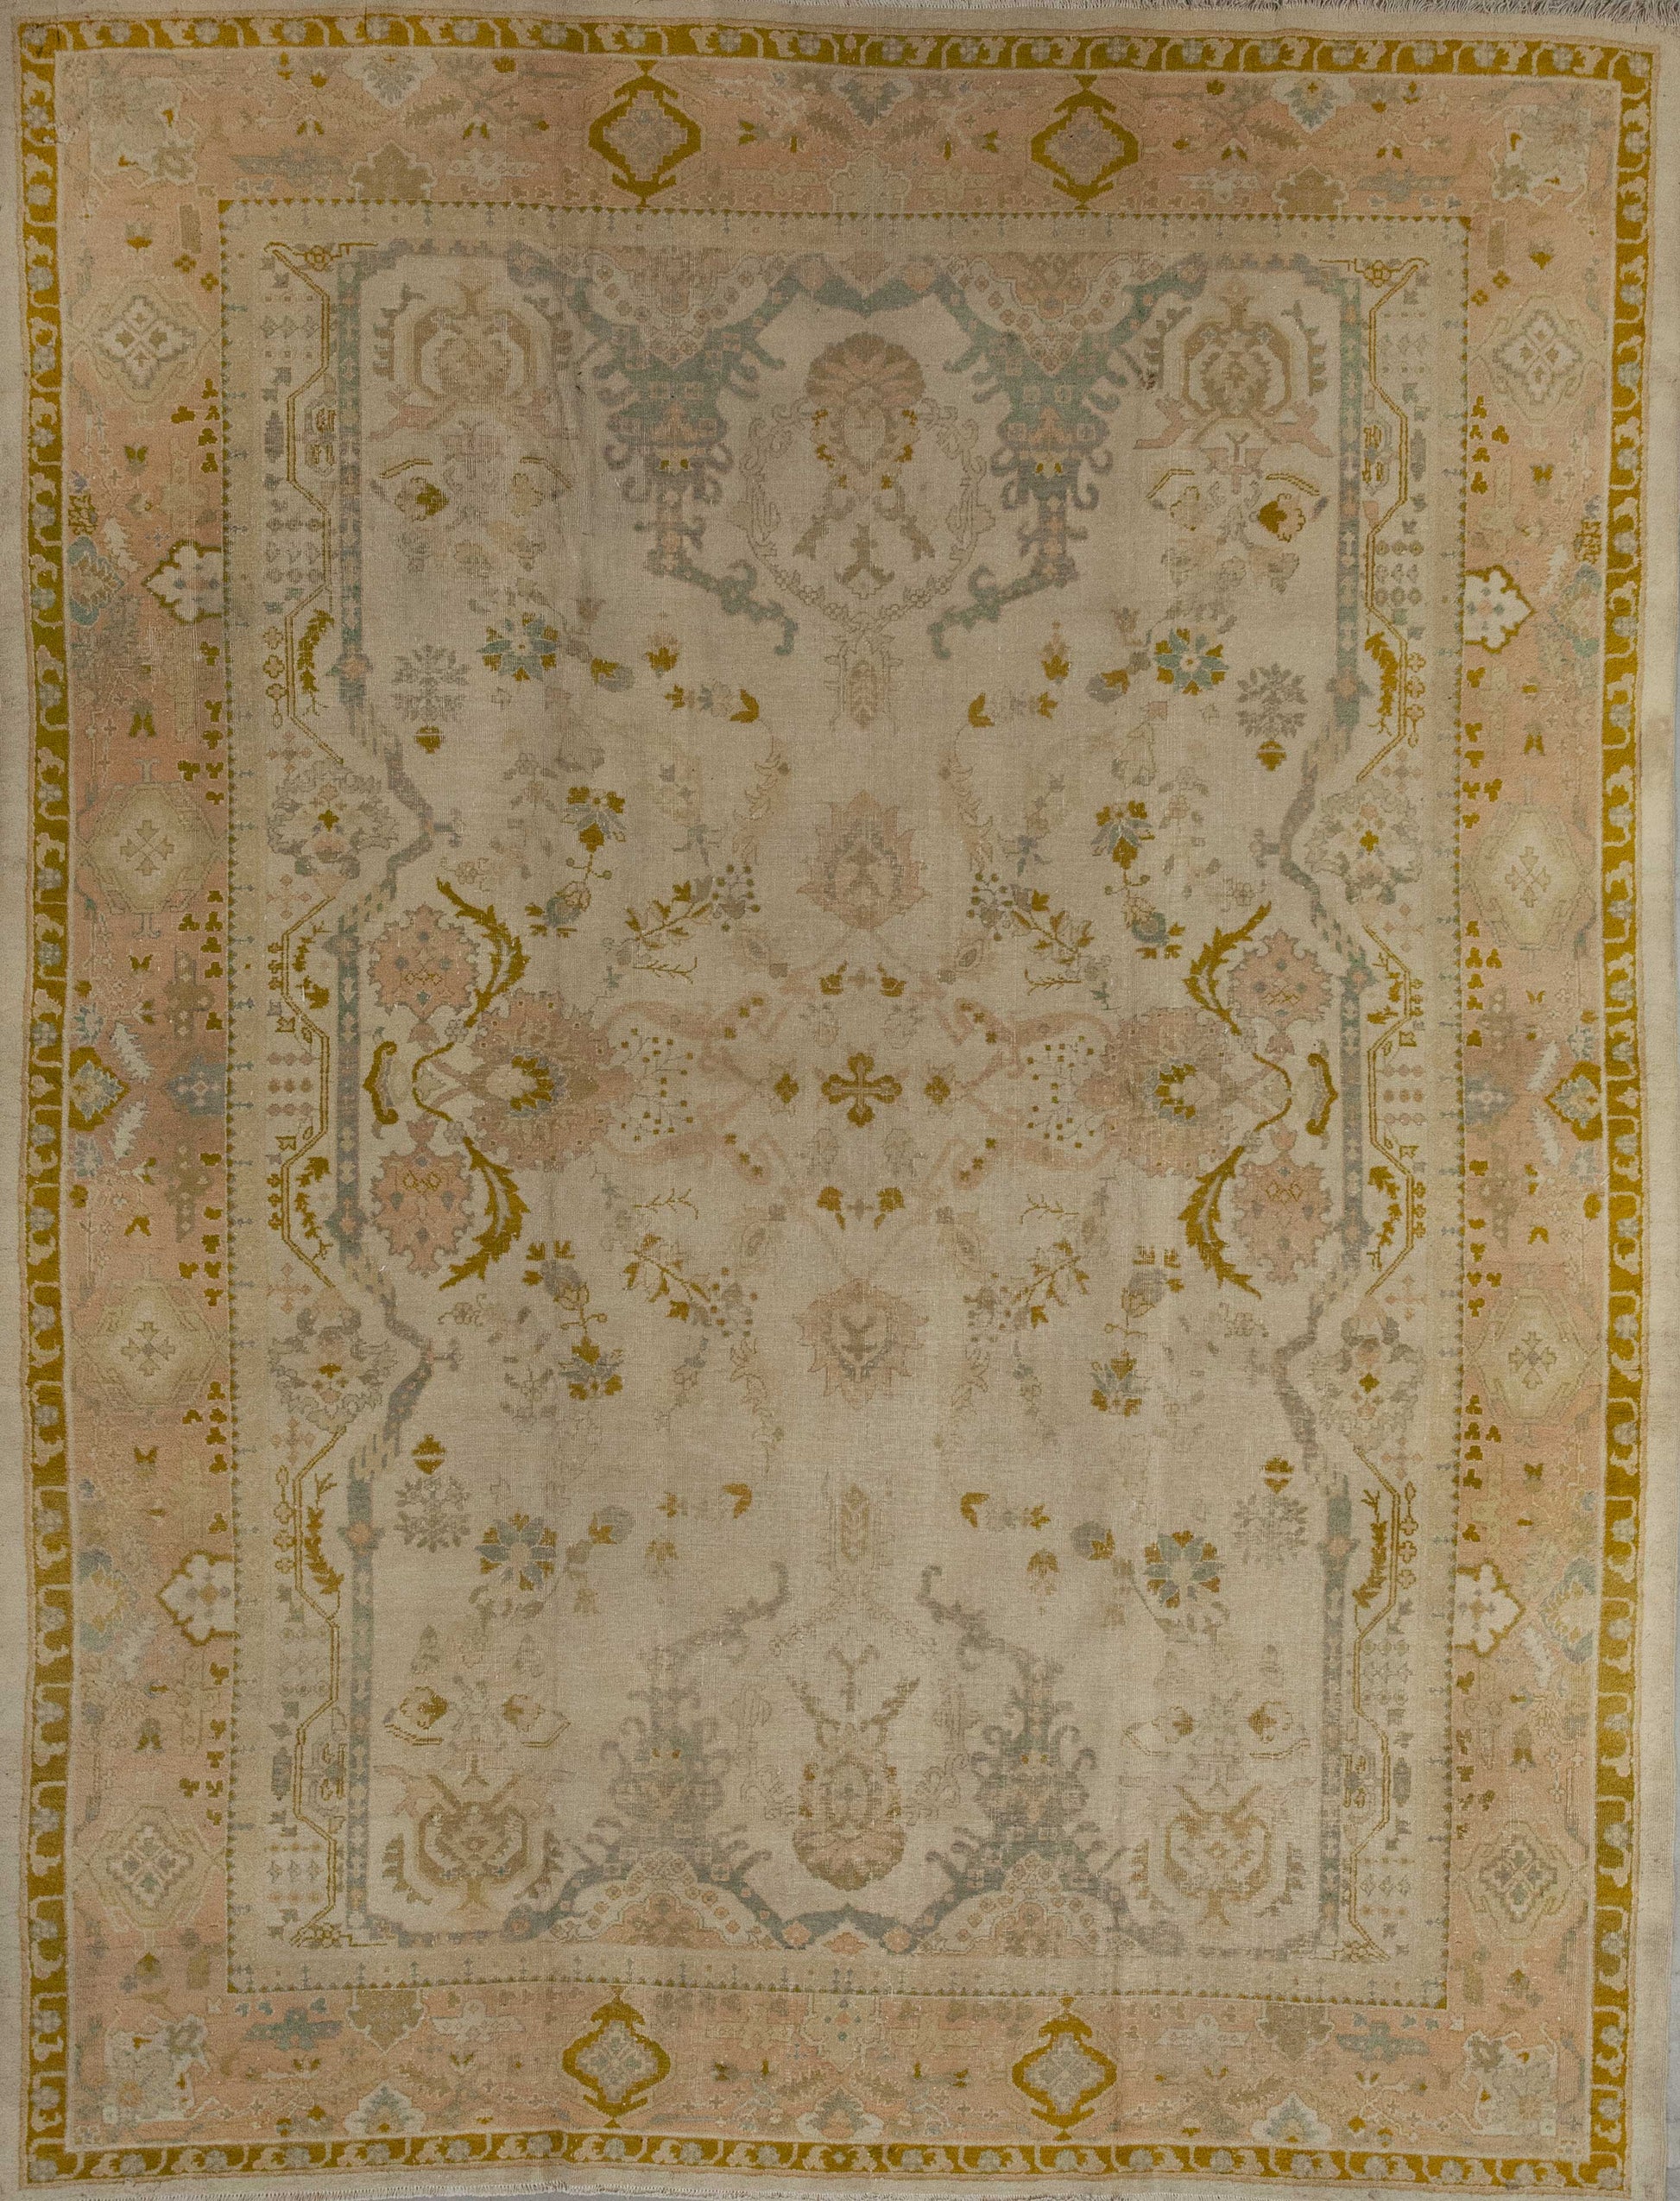 Old-fashioned carpet was woven within the yellow tones. Also, the color scheme has light tones of beige, pink, and gray. 